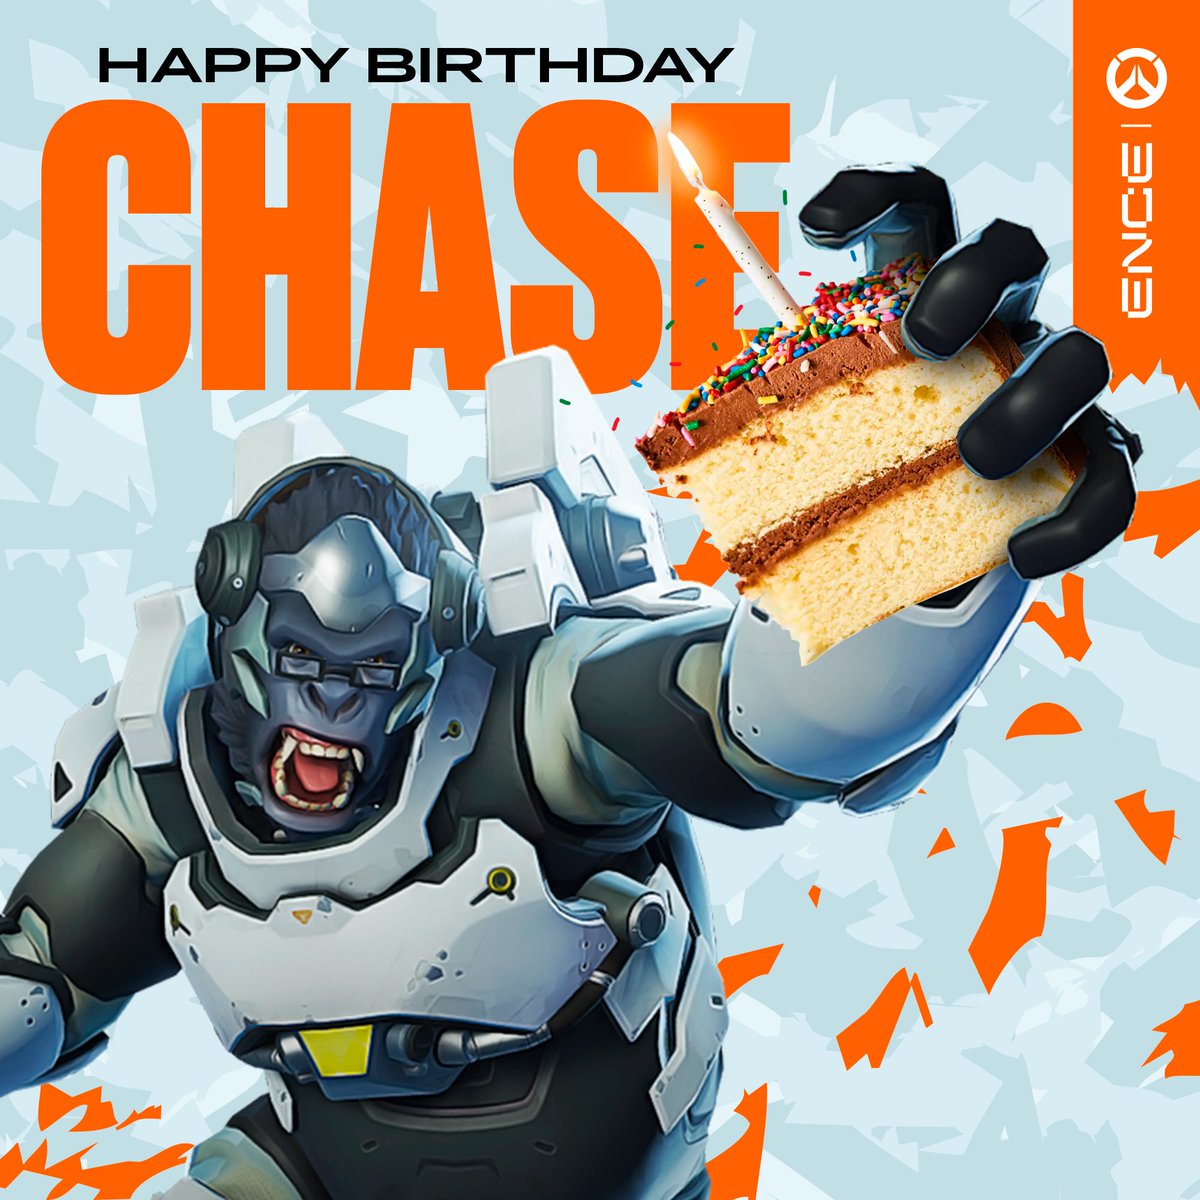 Time to dive into some birthday cake! HBD @Chase__ow 🥳🎂